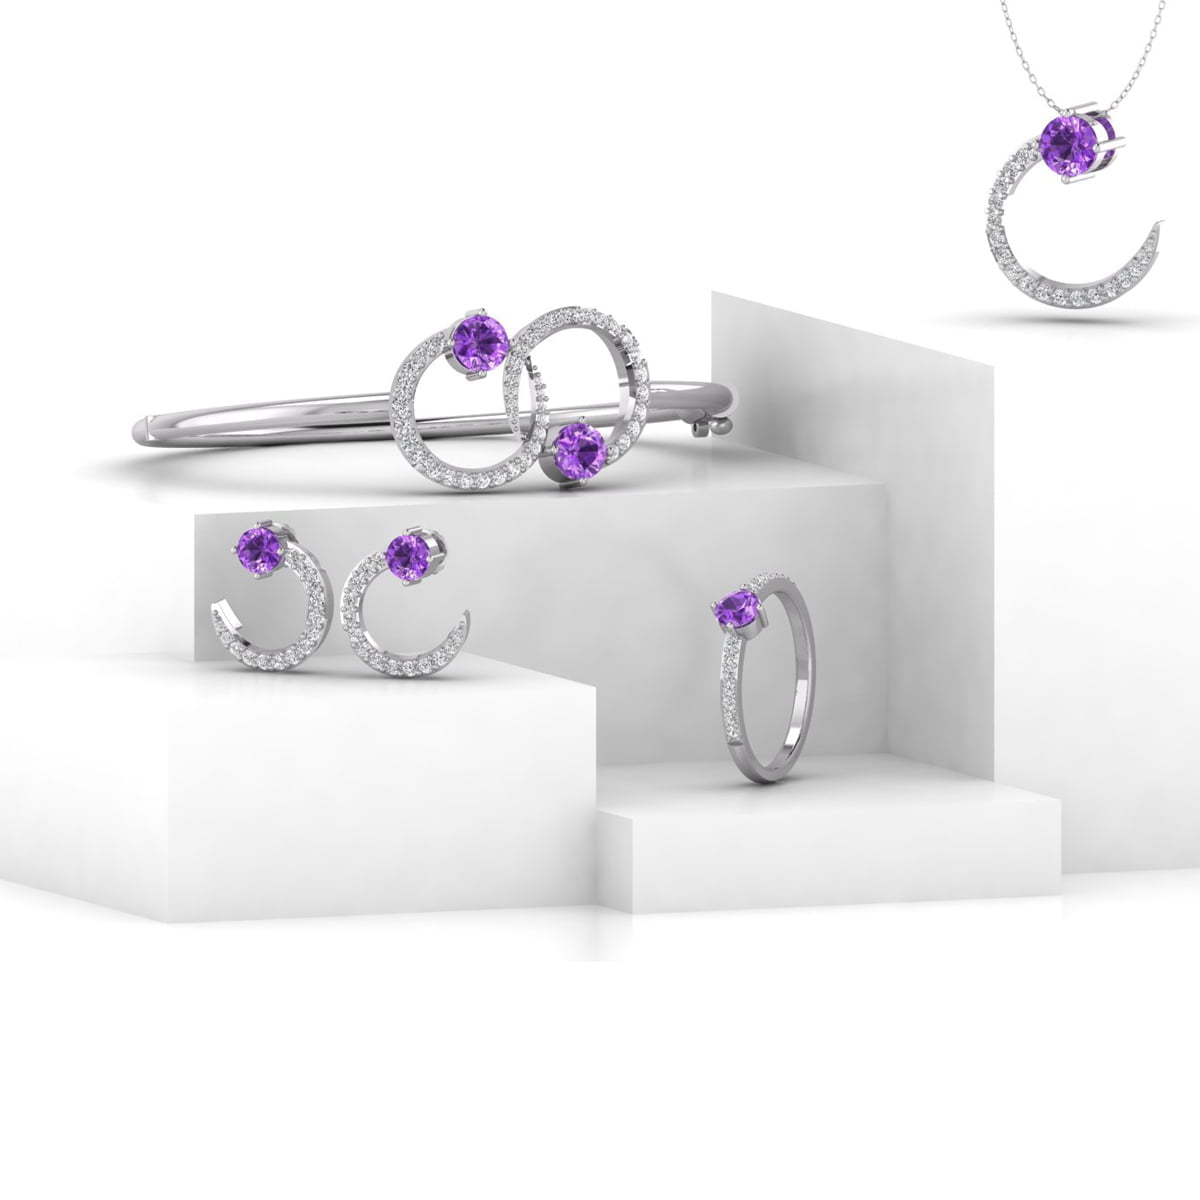 Amethyst Round CZ Stone Half Circle Shape Minimalist Pendant With Earrings, Bracelet And Ring (2 3/8 TCW)